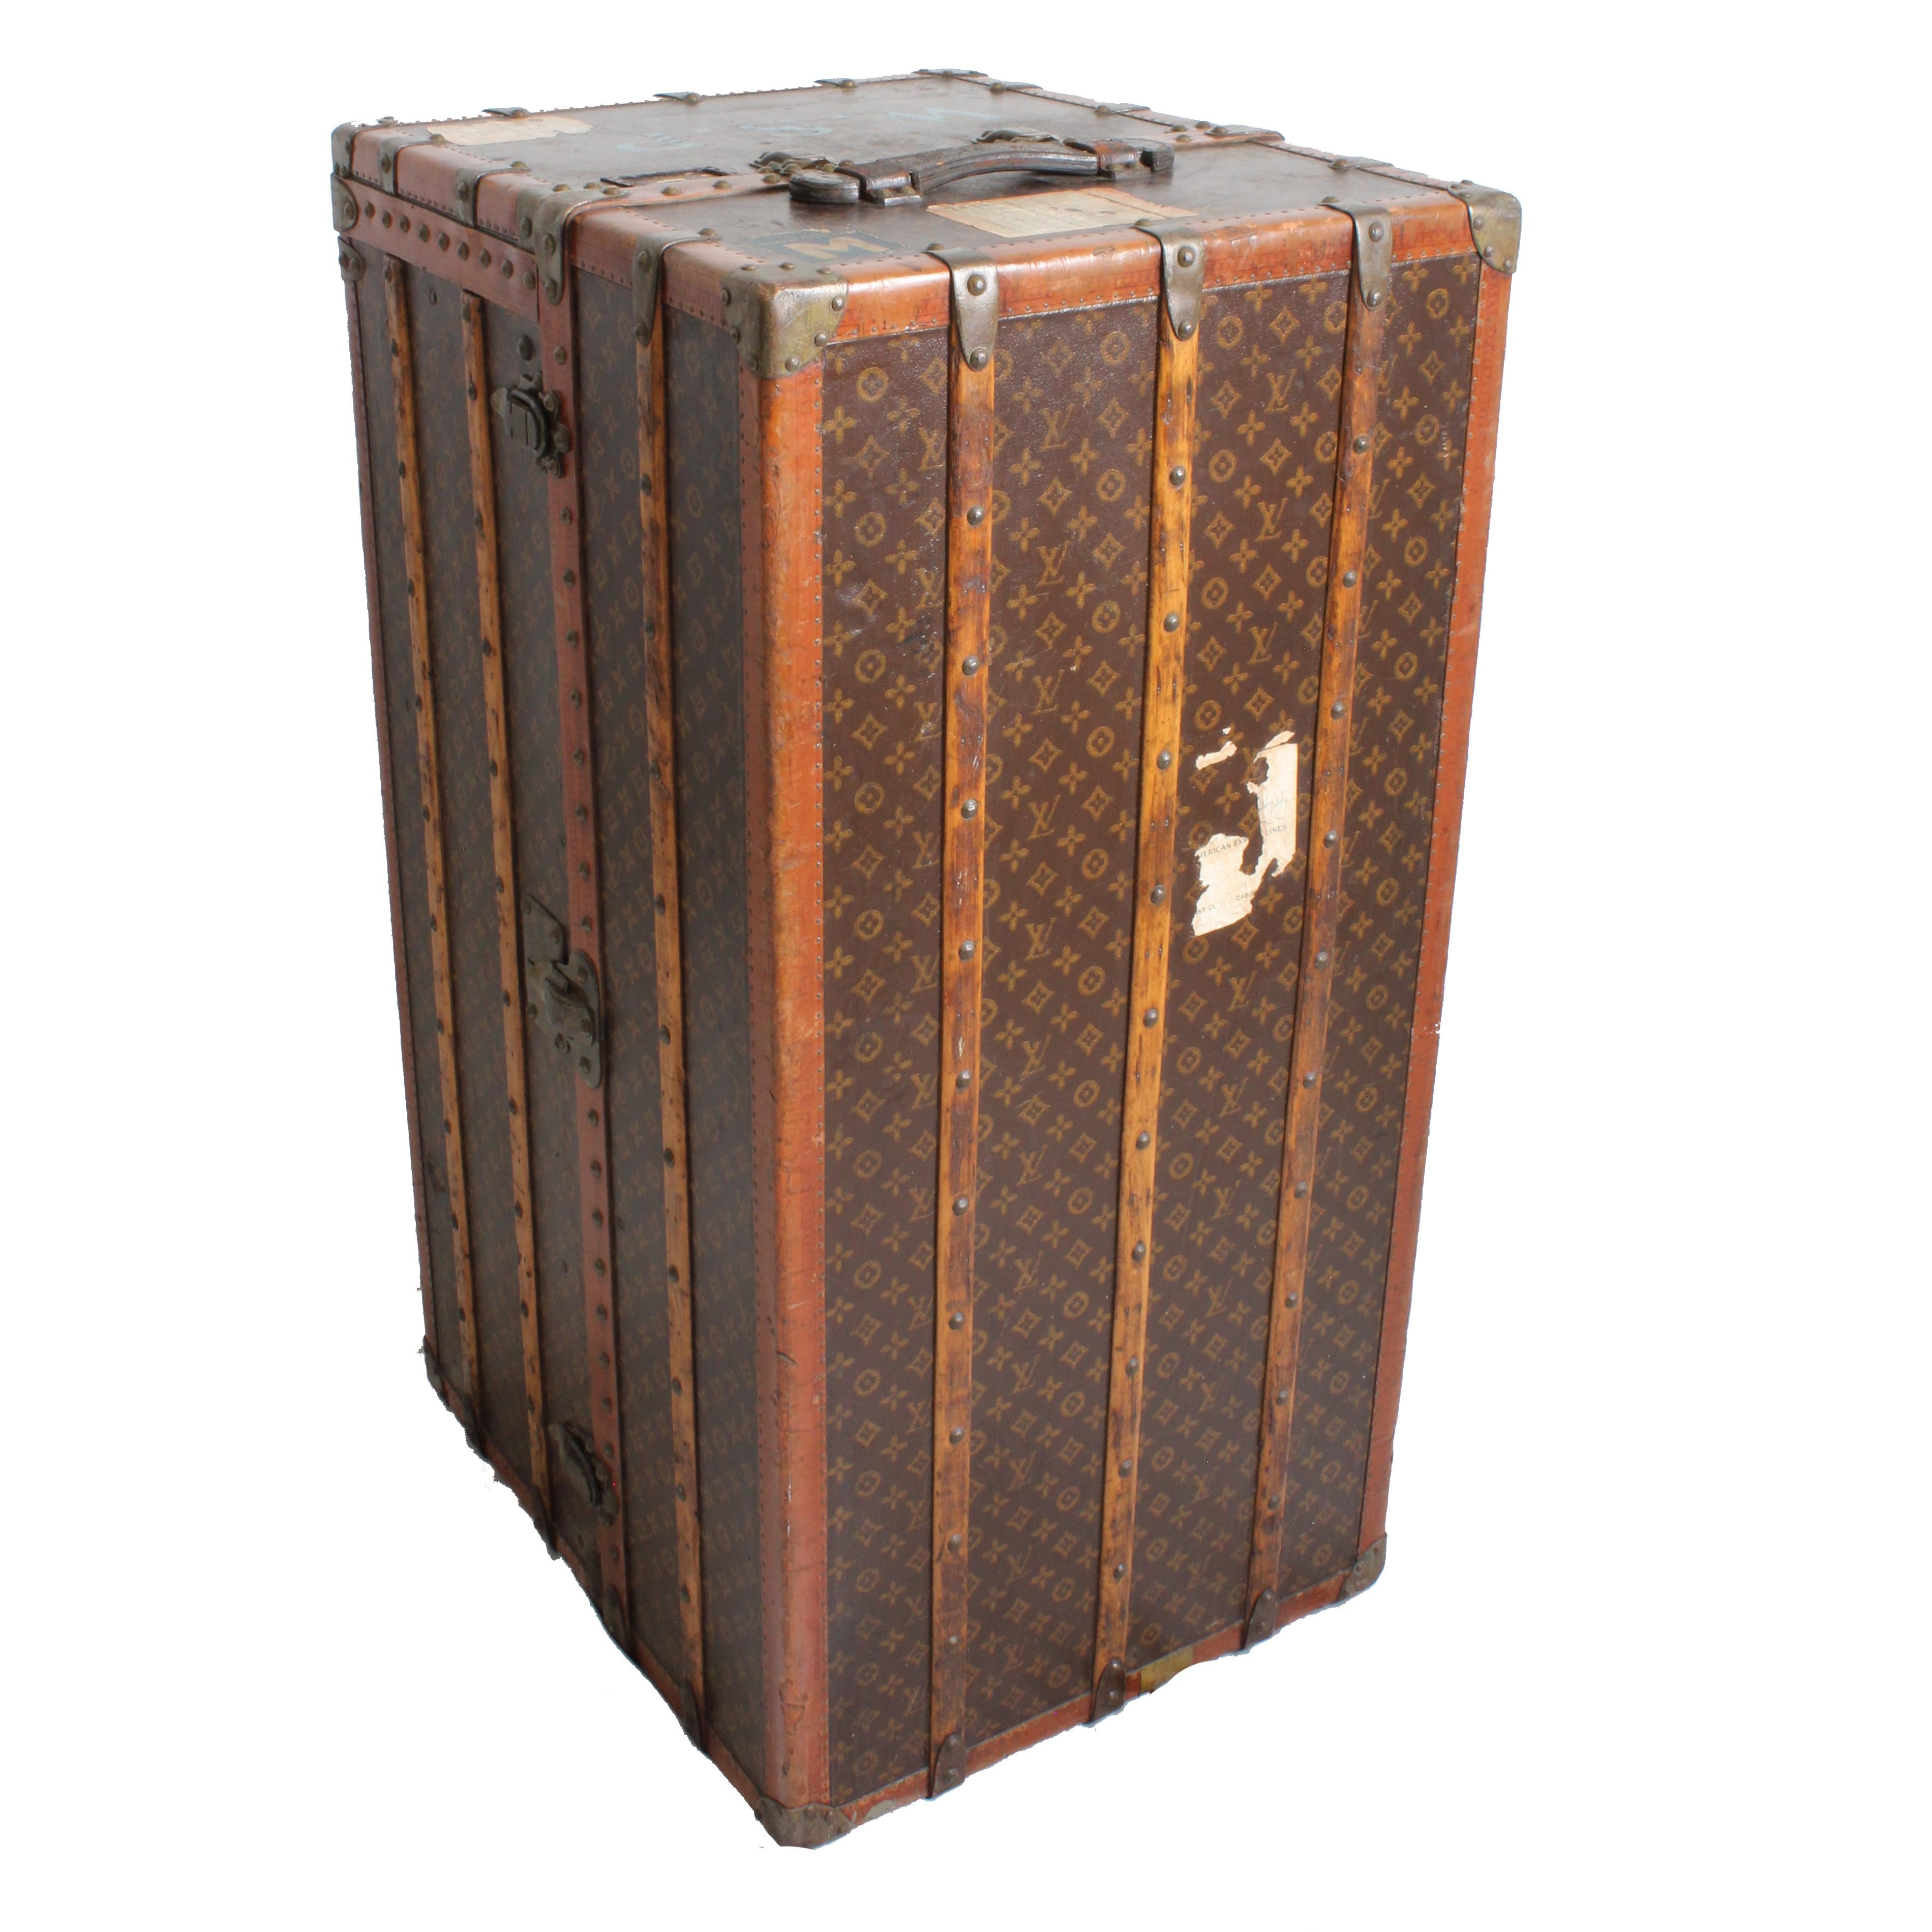 Louis Vuitton Large Wardrobe Steamer Trunk Monogram Travel Case Early 20th C  For Sale 2